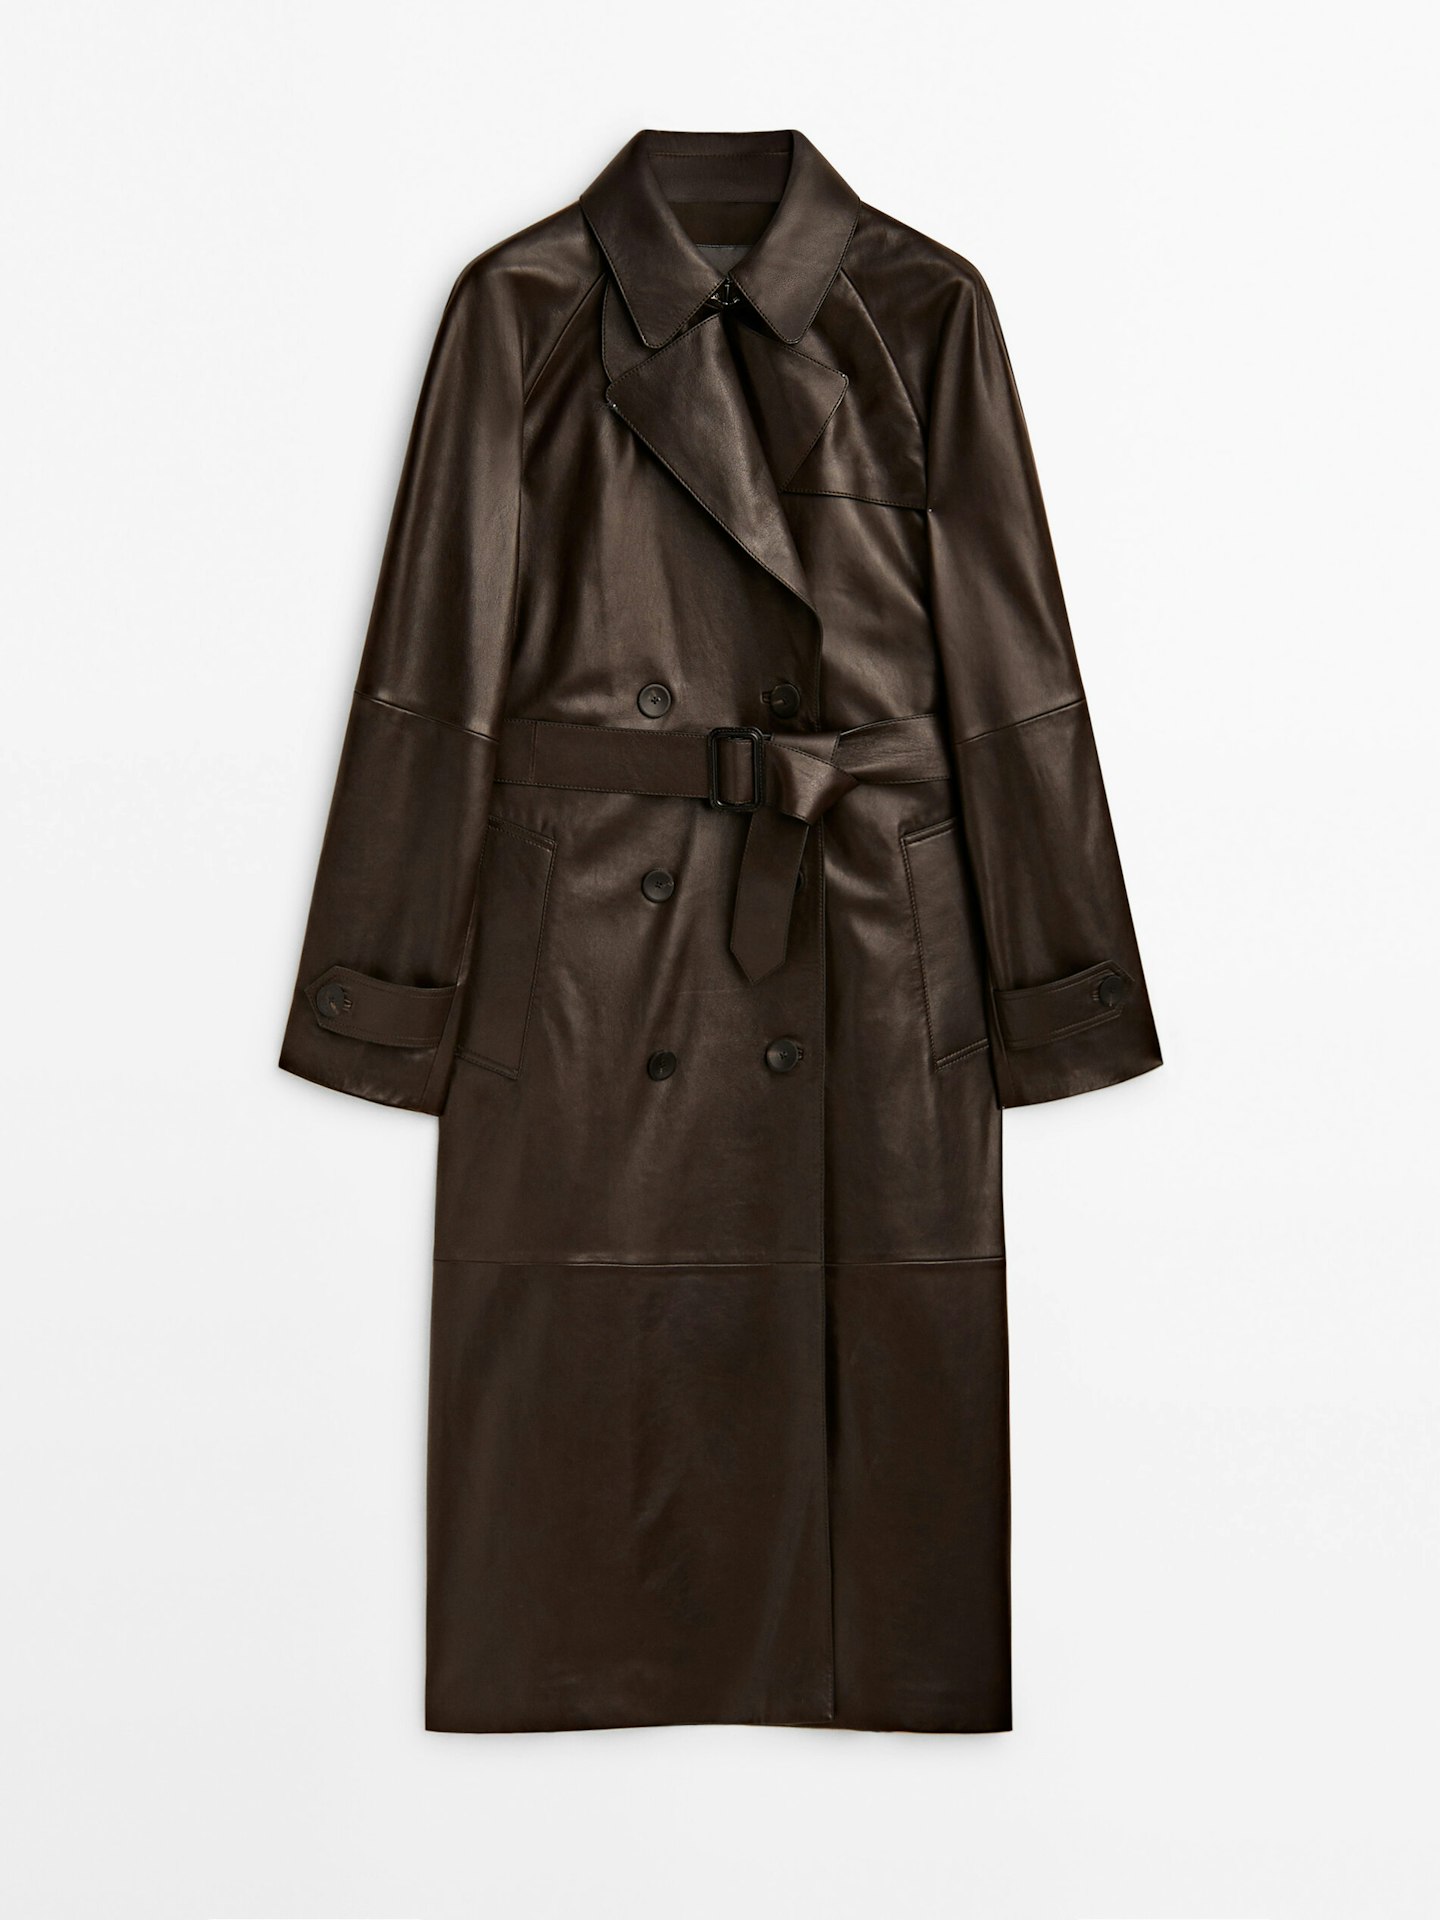 Massimo Dutti, Nappa Leather Trench-Style Coat With Belt